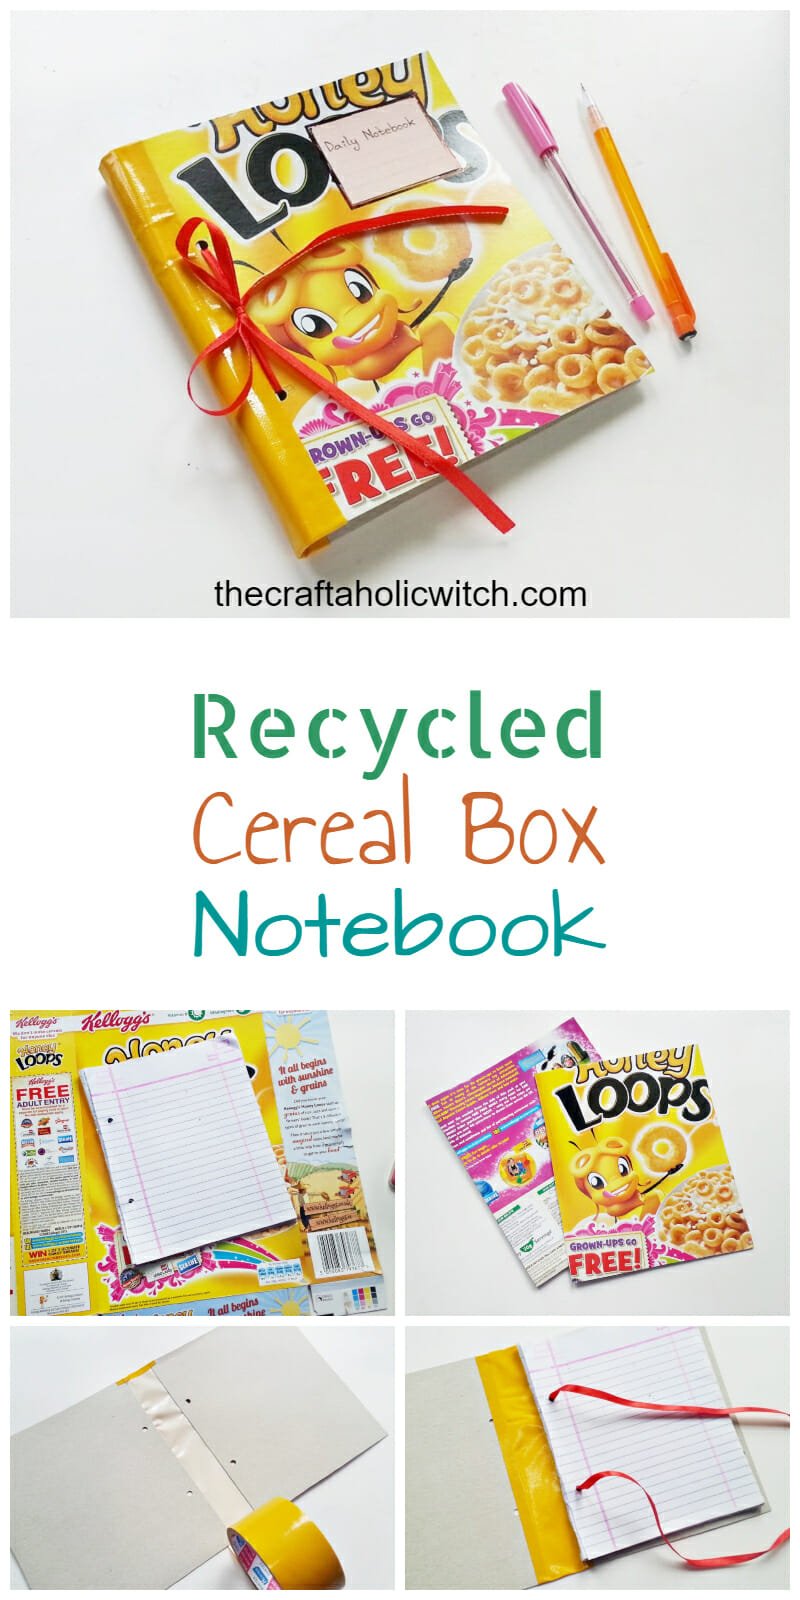 recycled notebook pin image - DIY Recycled Cereal Box Notebook